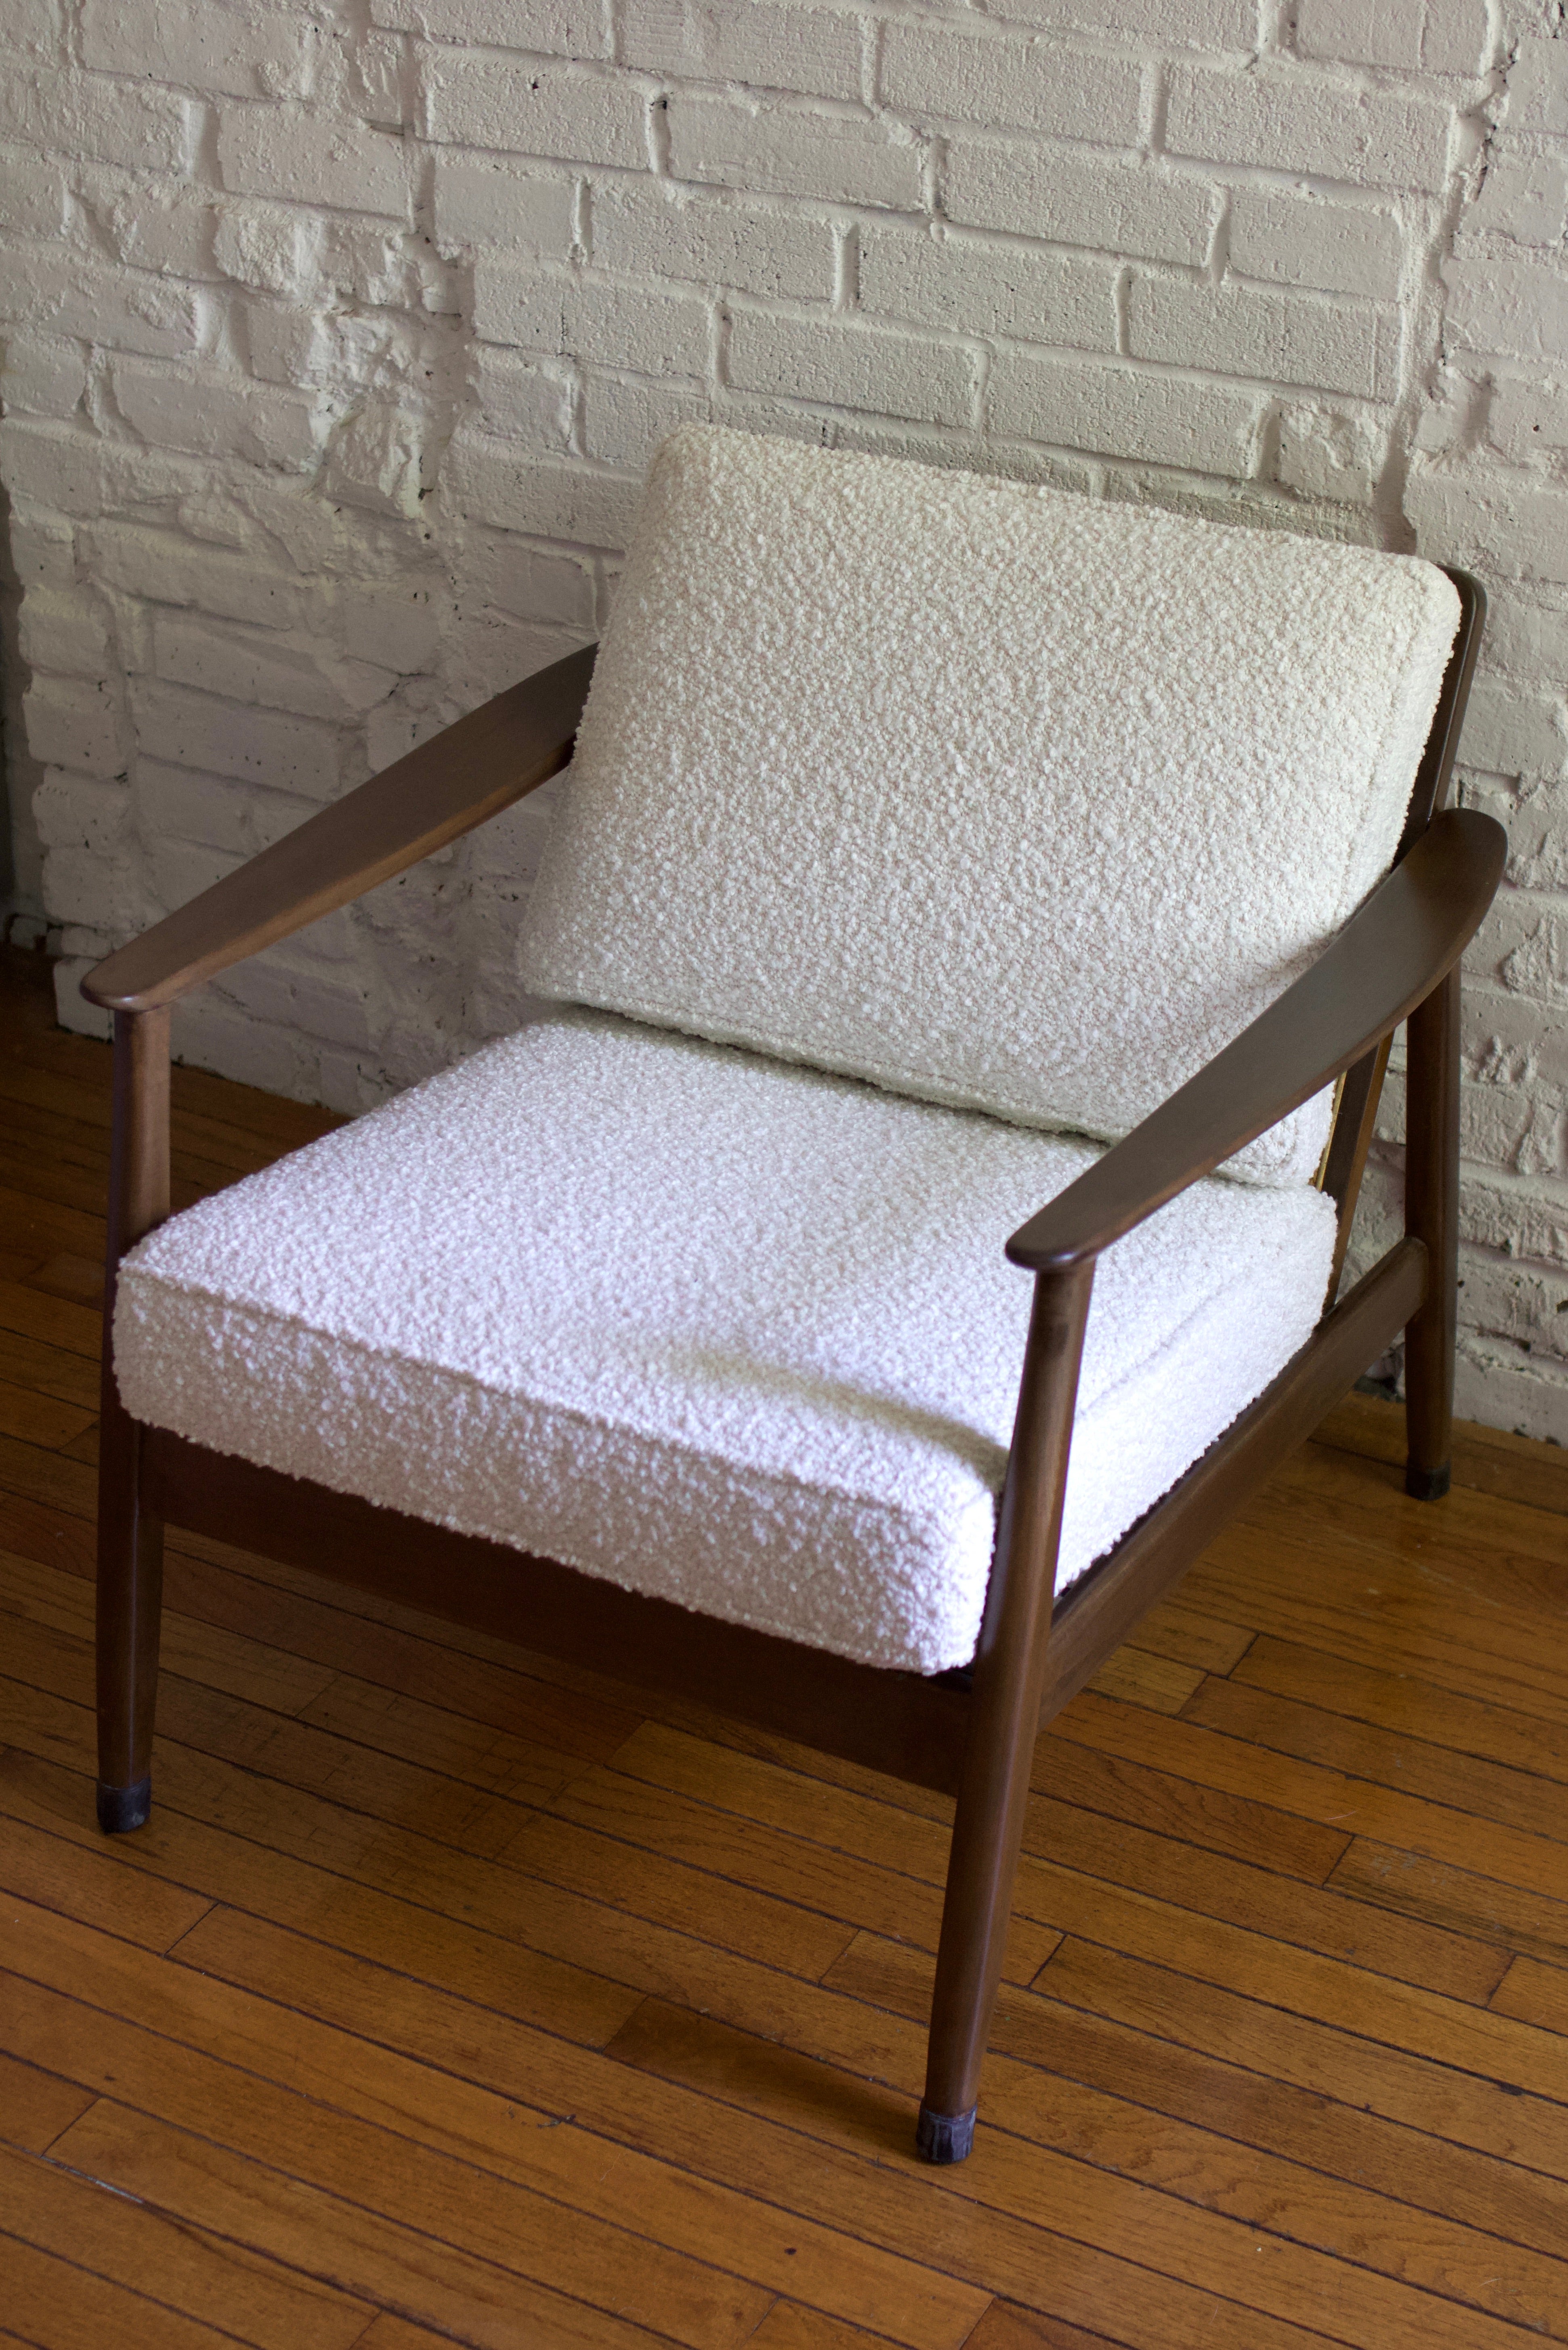 1960s Swedish armchair designed by Folke Ohlsson for Dux in teak wood and Rattan. Sweden, 1960s. Excellently restored and reupholstered in a creamy white boucle. Espresso-finished teak frame and rattan in fantastic condition.

With a timeless,